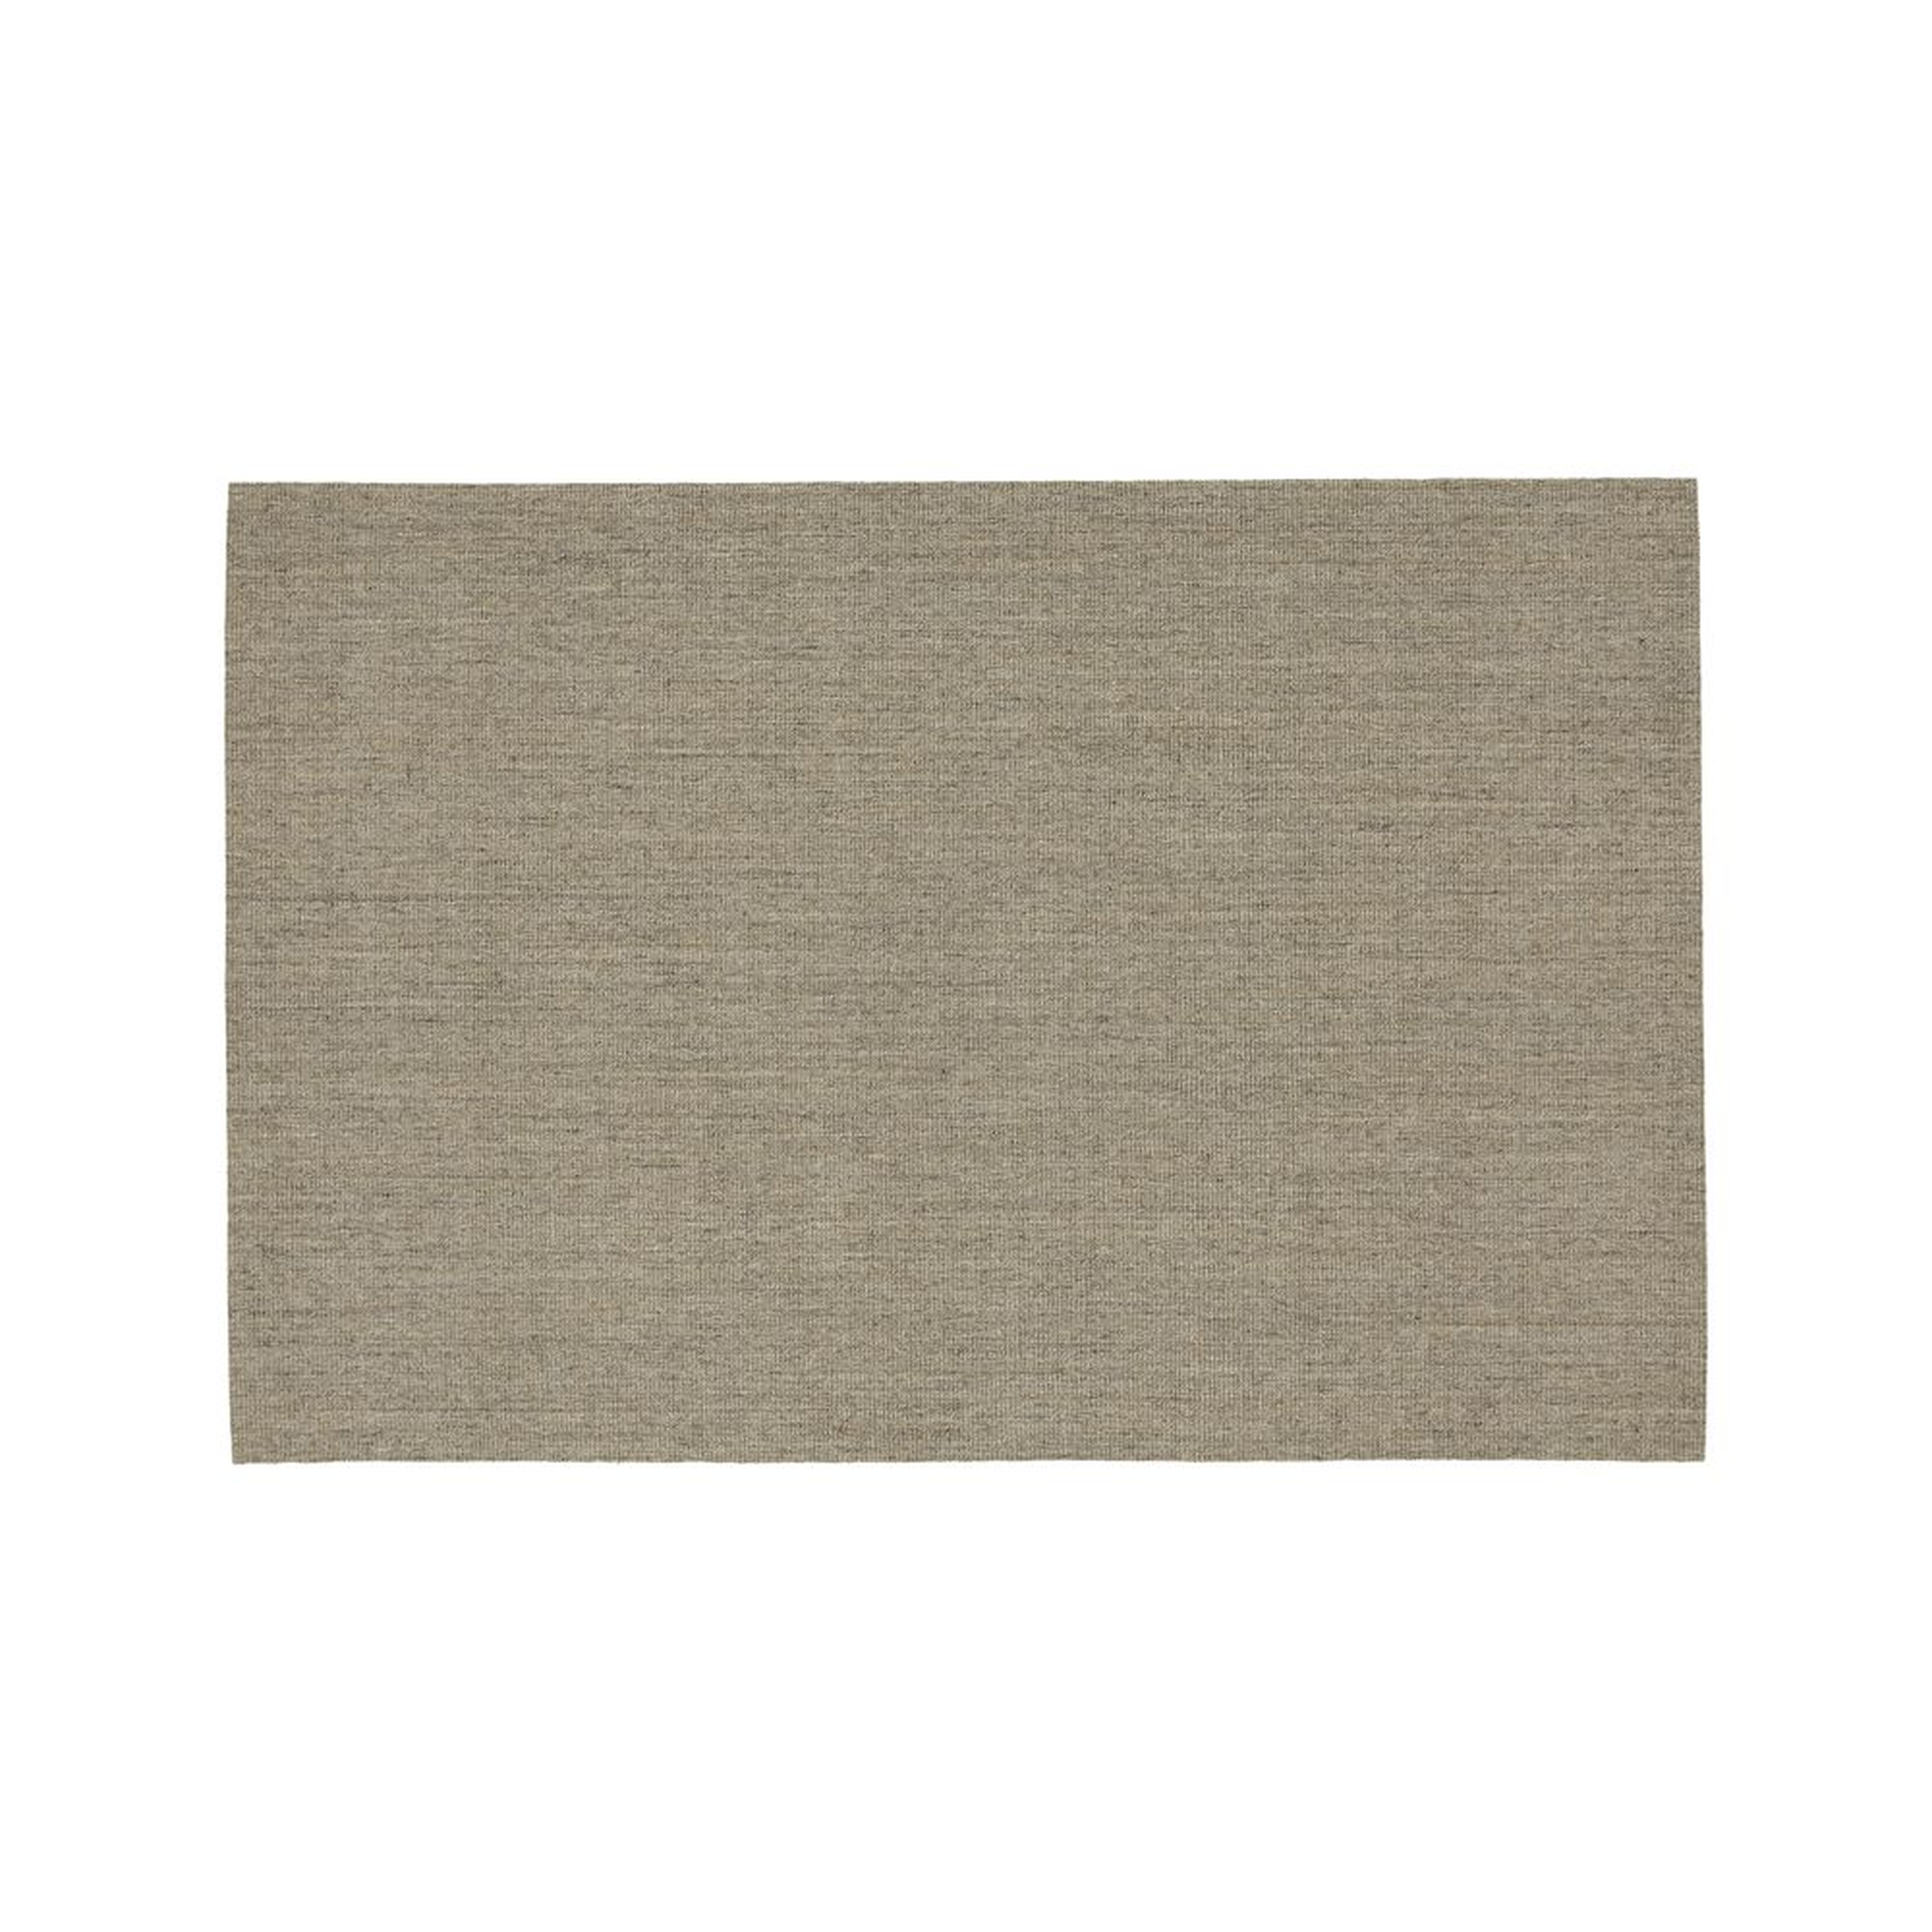 Sisal Heritage Taupe Area Rug 6'x9' - Crate and Barrel